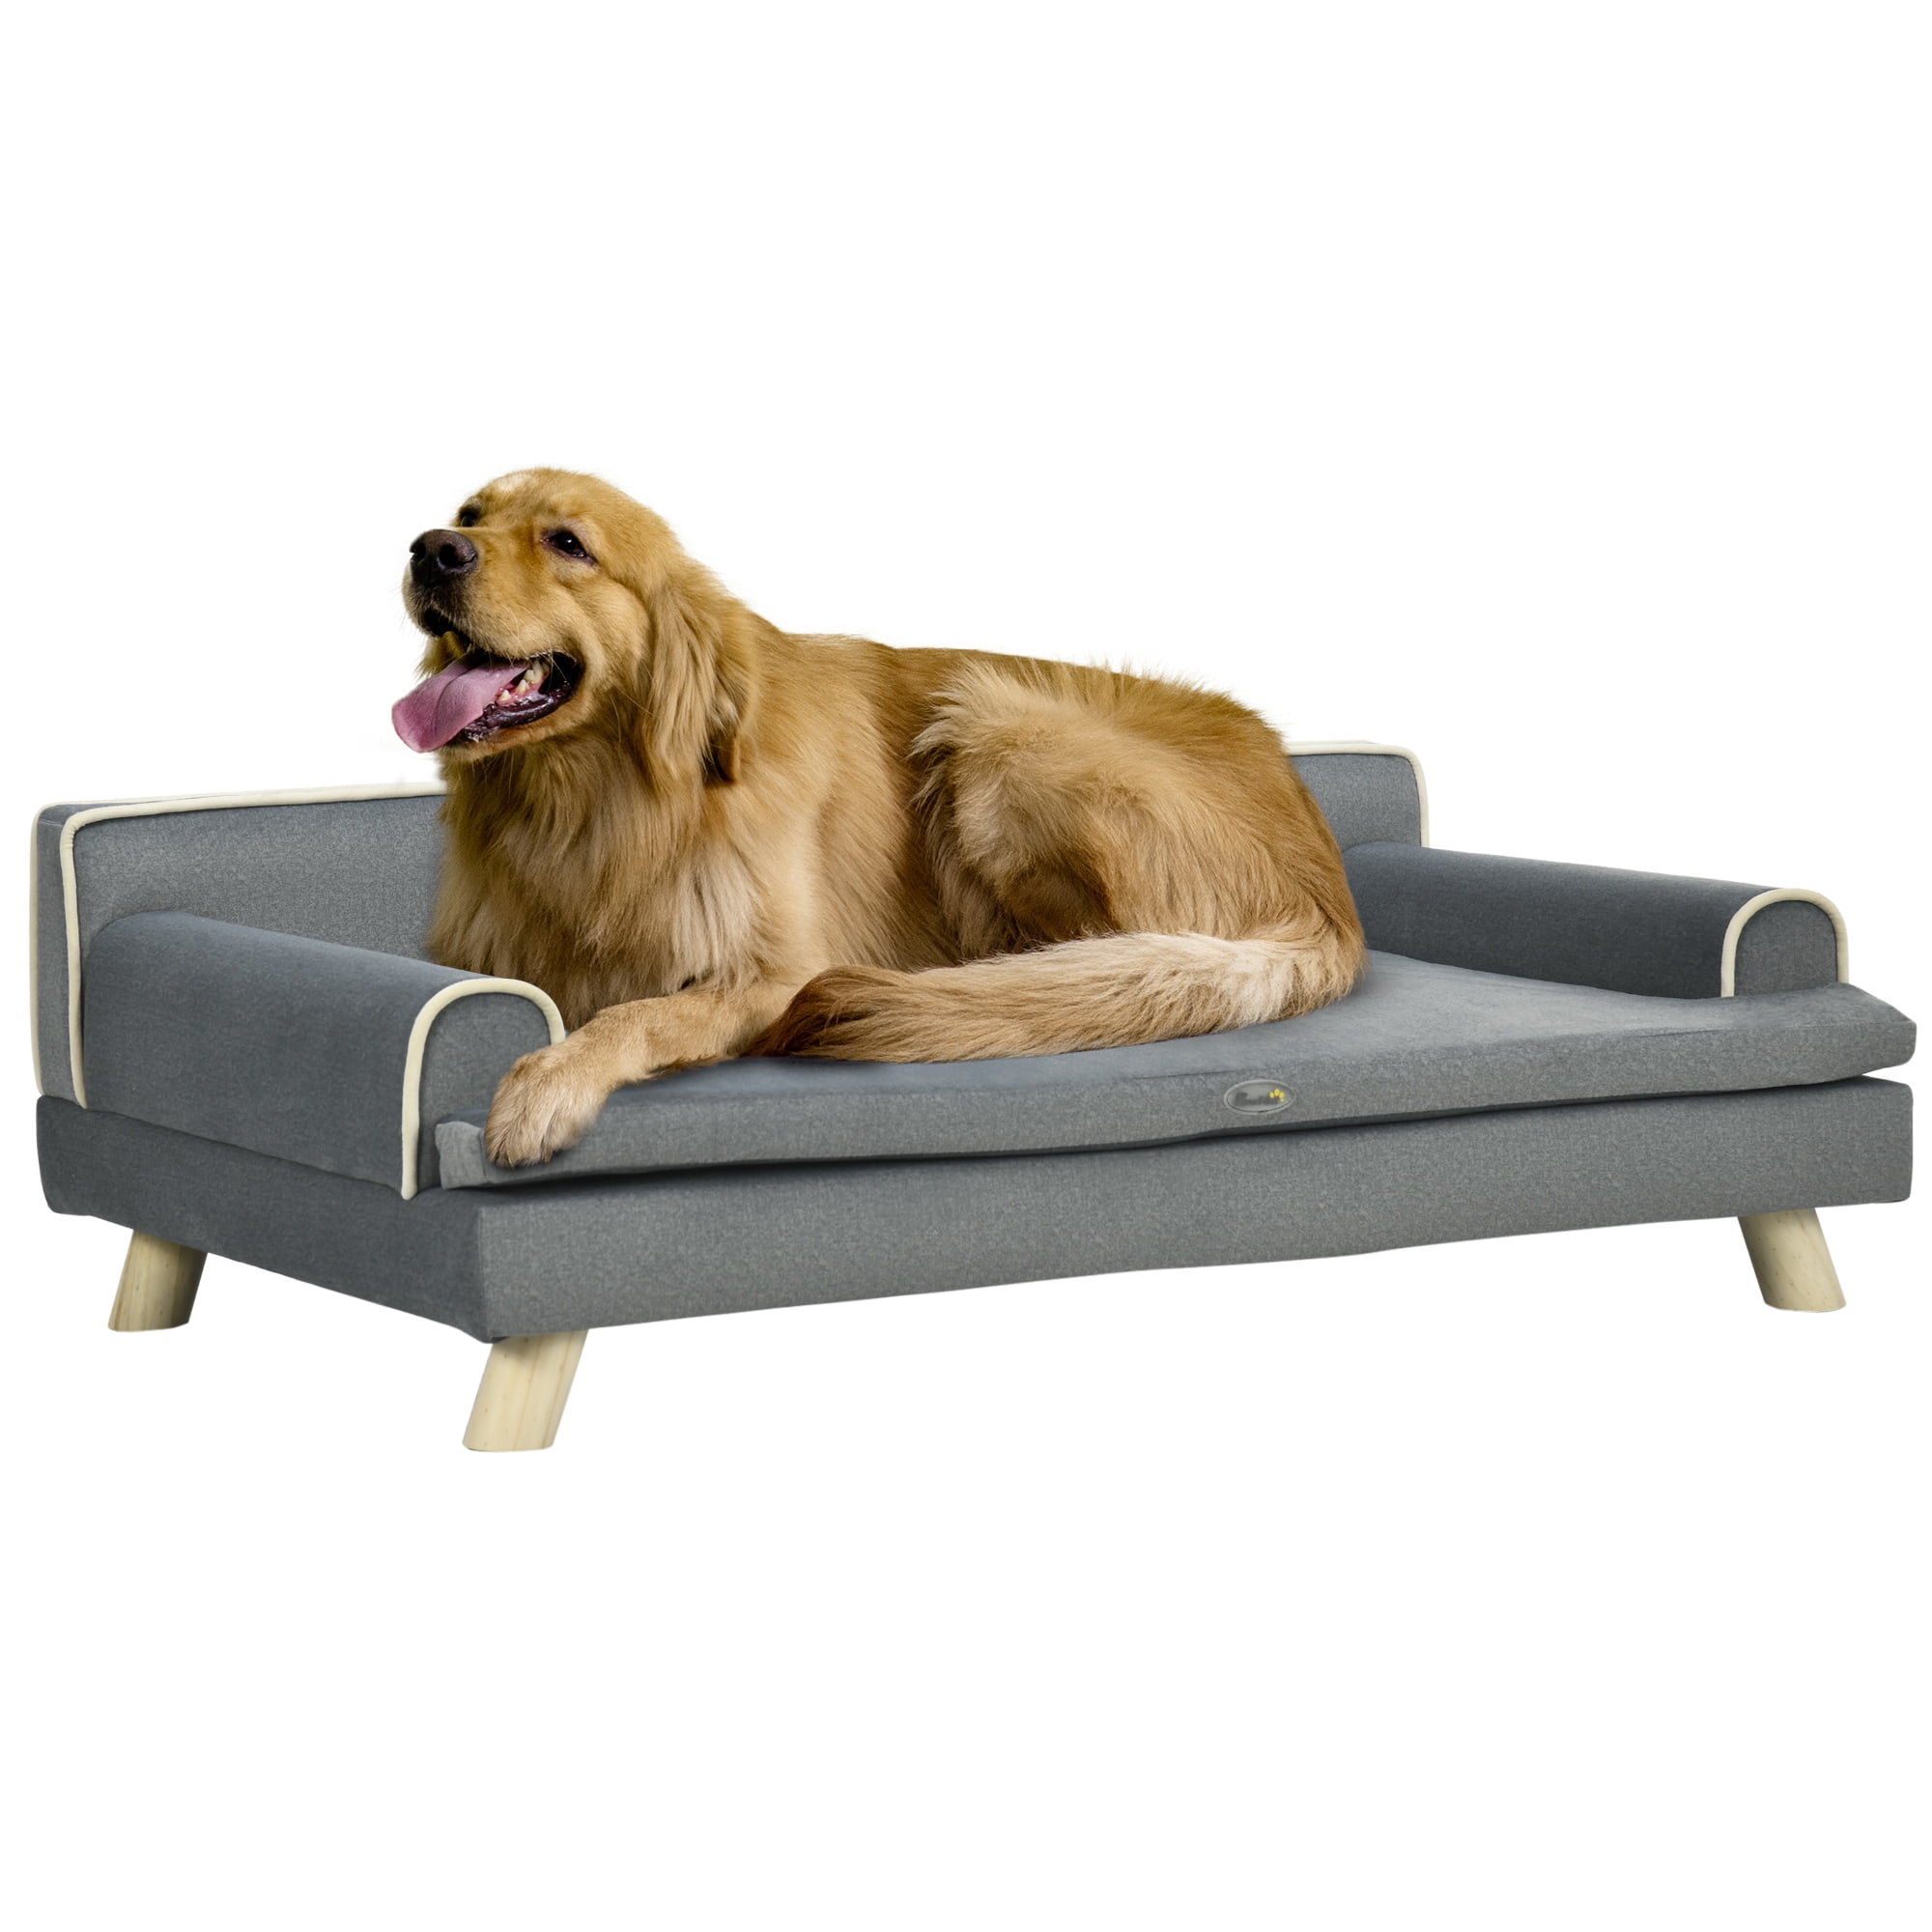 Tonen Subtropisch een miljard PawHut Soft Foam Large Dog Couch for a Fancy Dog Bed, Spongy Dog Sofa Bed  with Washable Cover, Wooden Legs, Elevated Dog Bed, Gray - Walmart.com